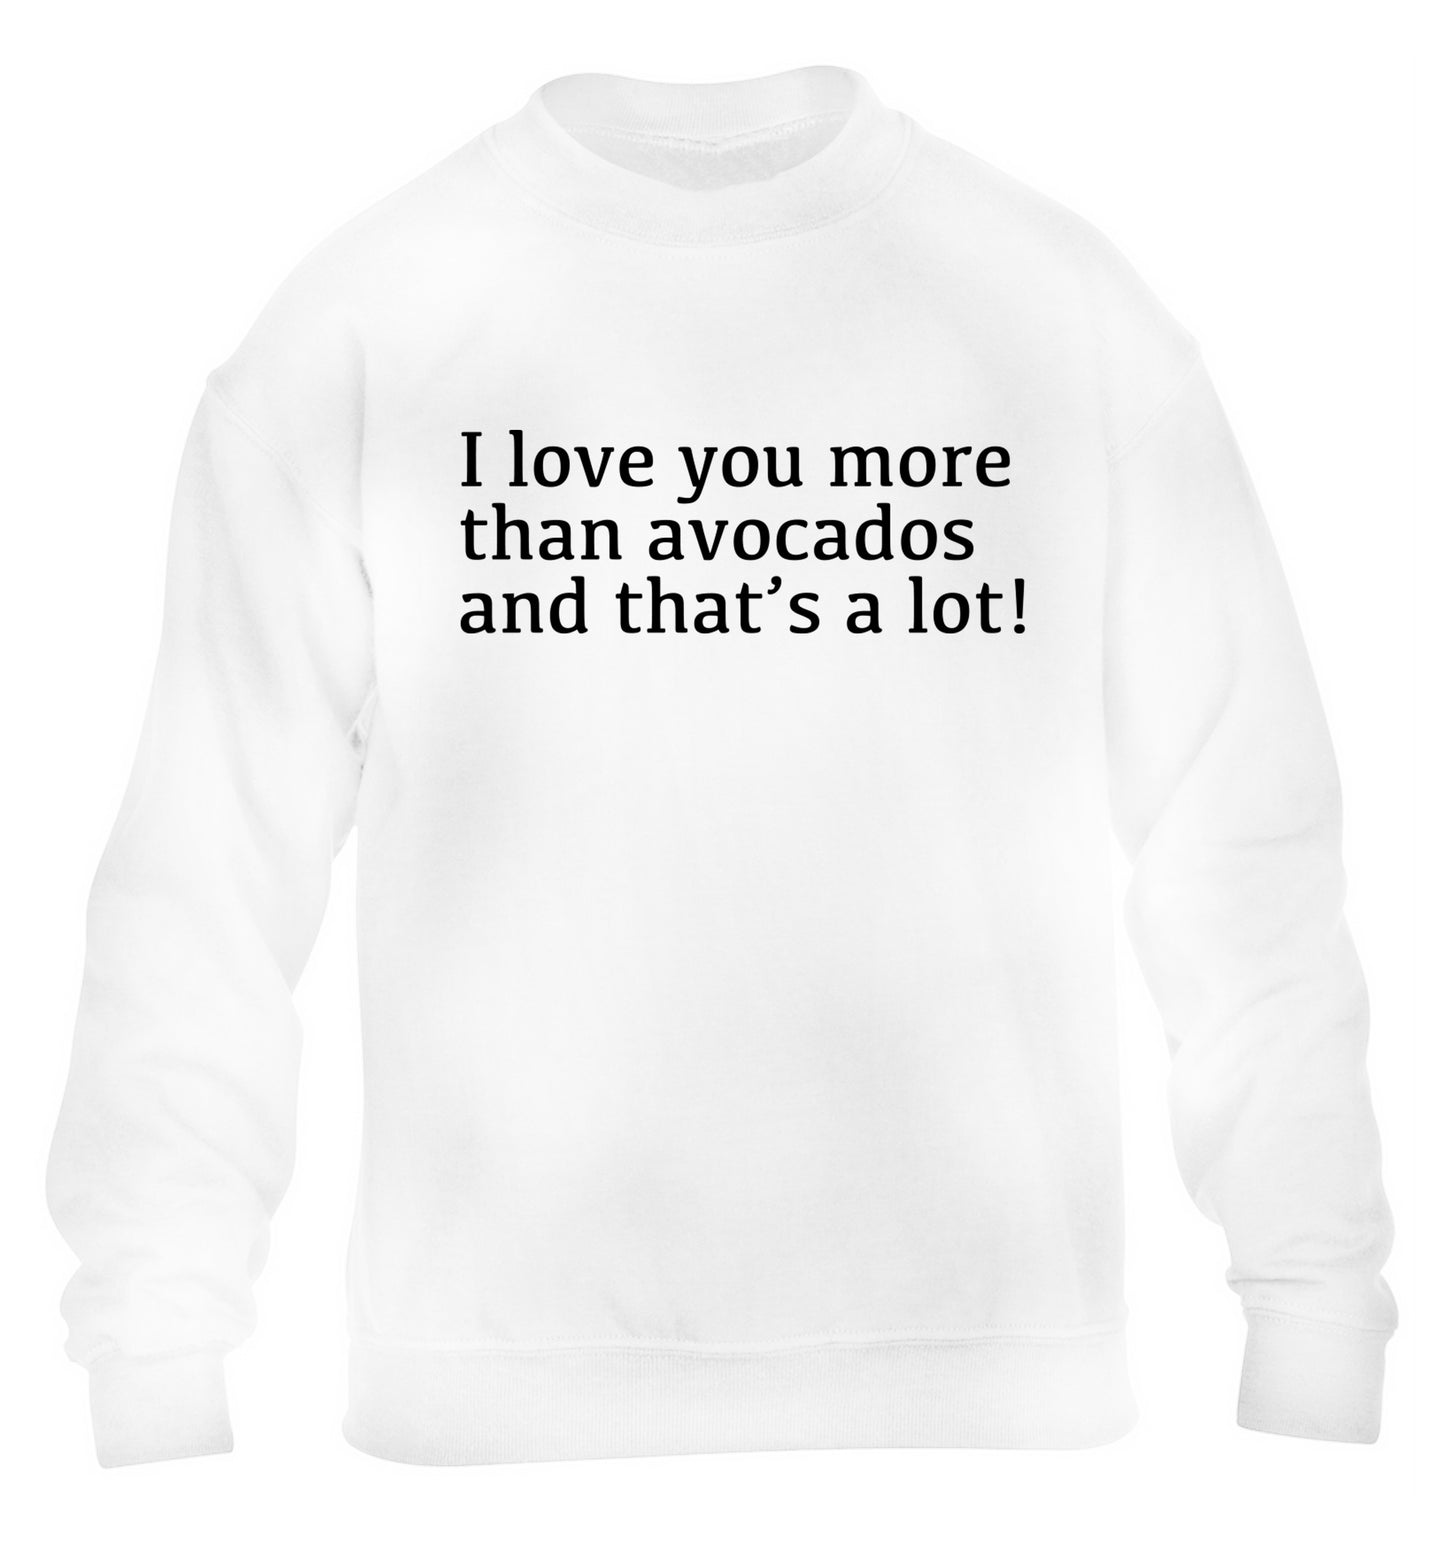 I love you more than avocados and that's a lot children's white sweater 12-14 Years